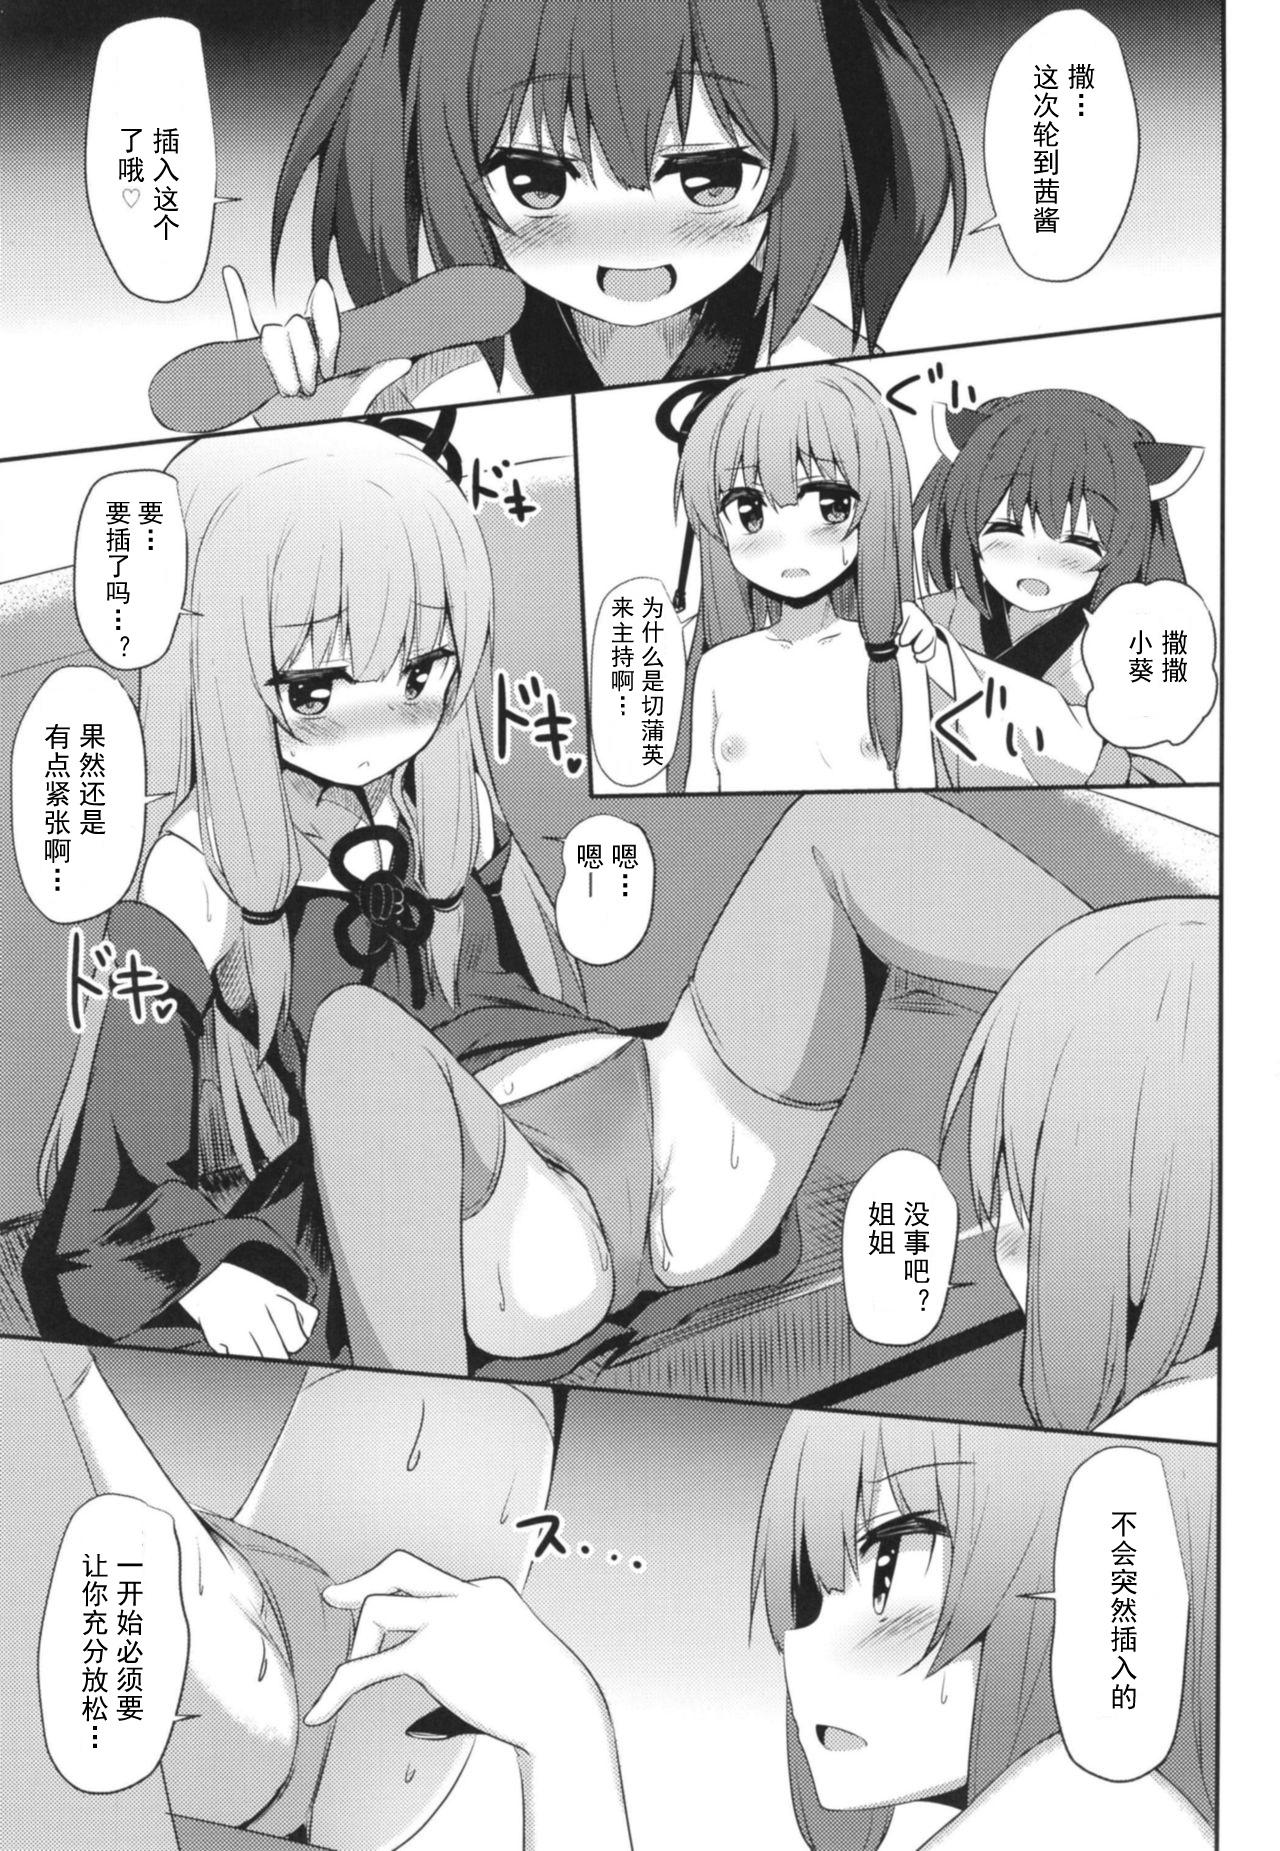 Chaturbate [Milk Pudding (Jamcy)] Akane-chan Challenge! 4-kaime (VOICEROID) [Chinese] [古早个人汉化] [Digital] - Voiceroid Rubia - Page 3